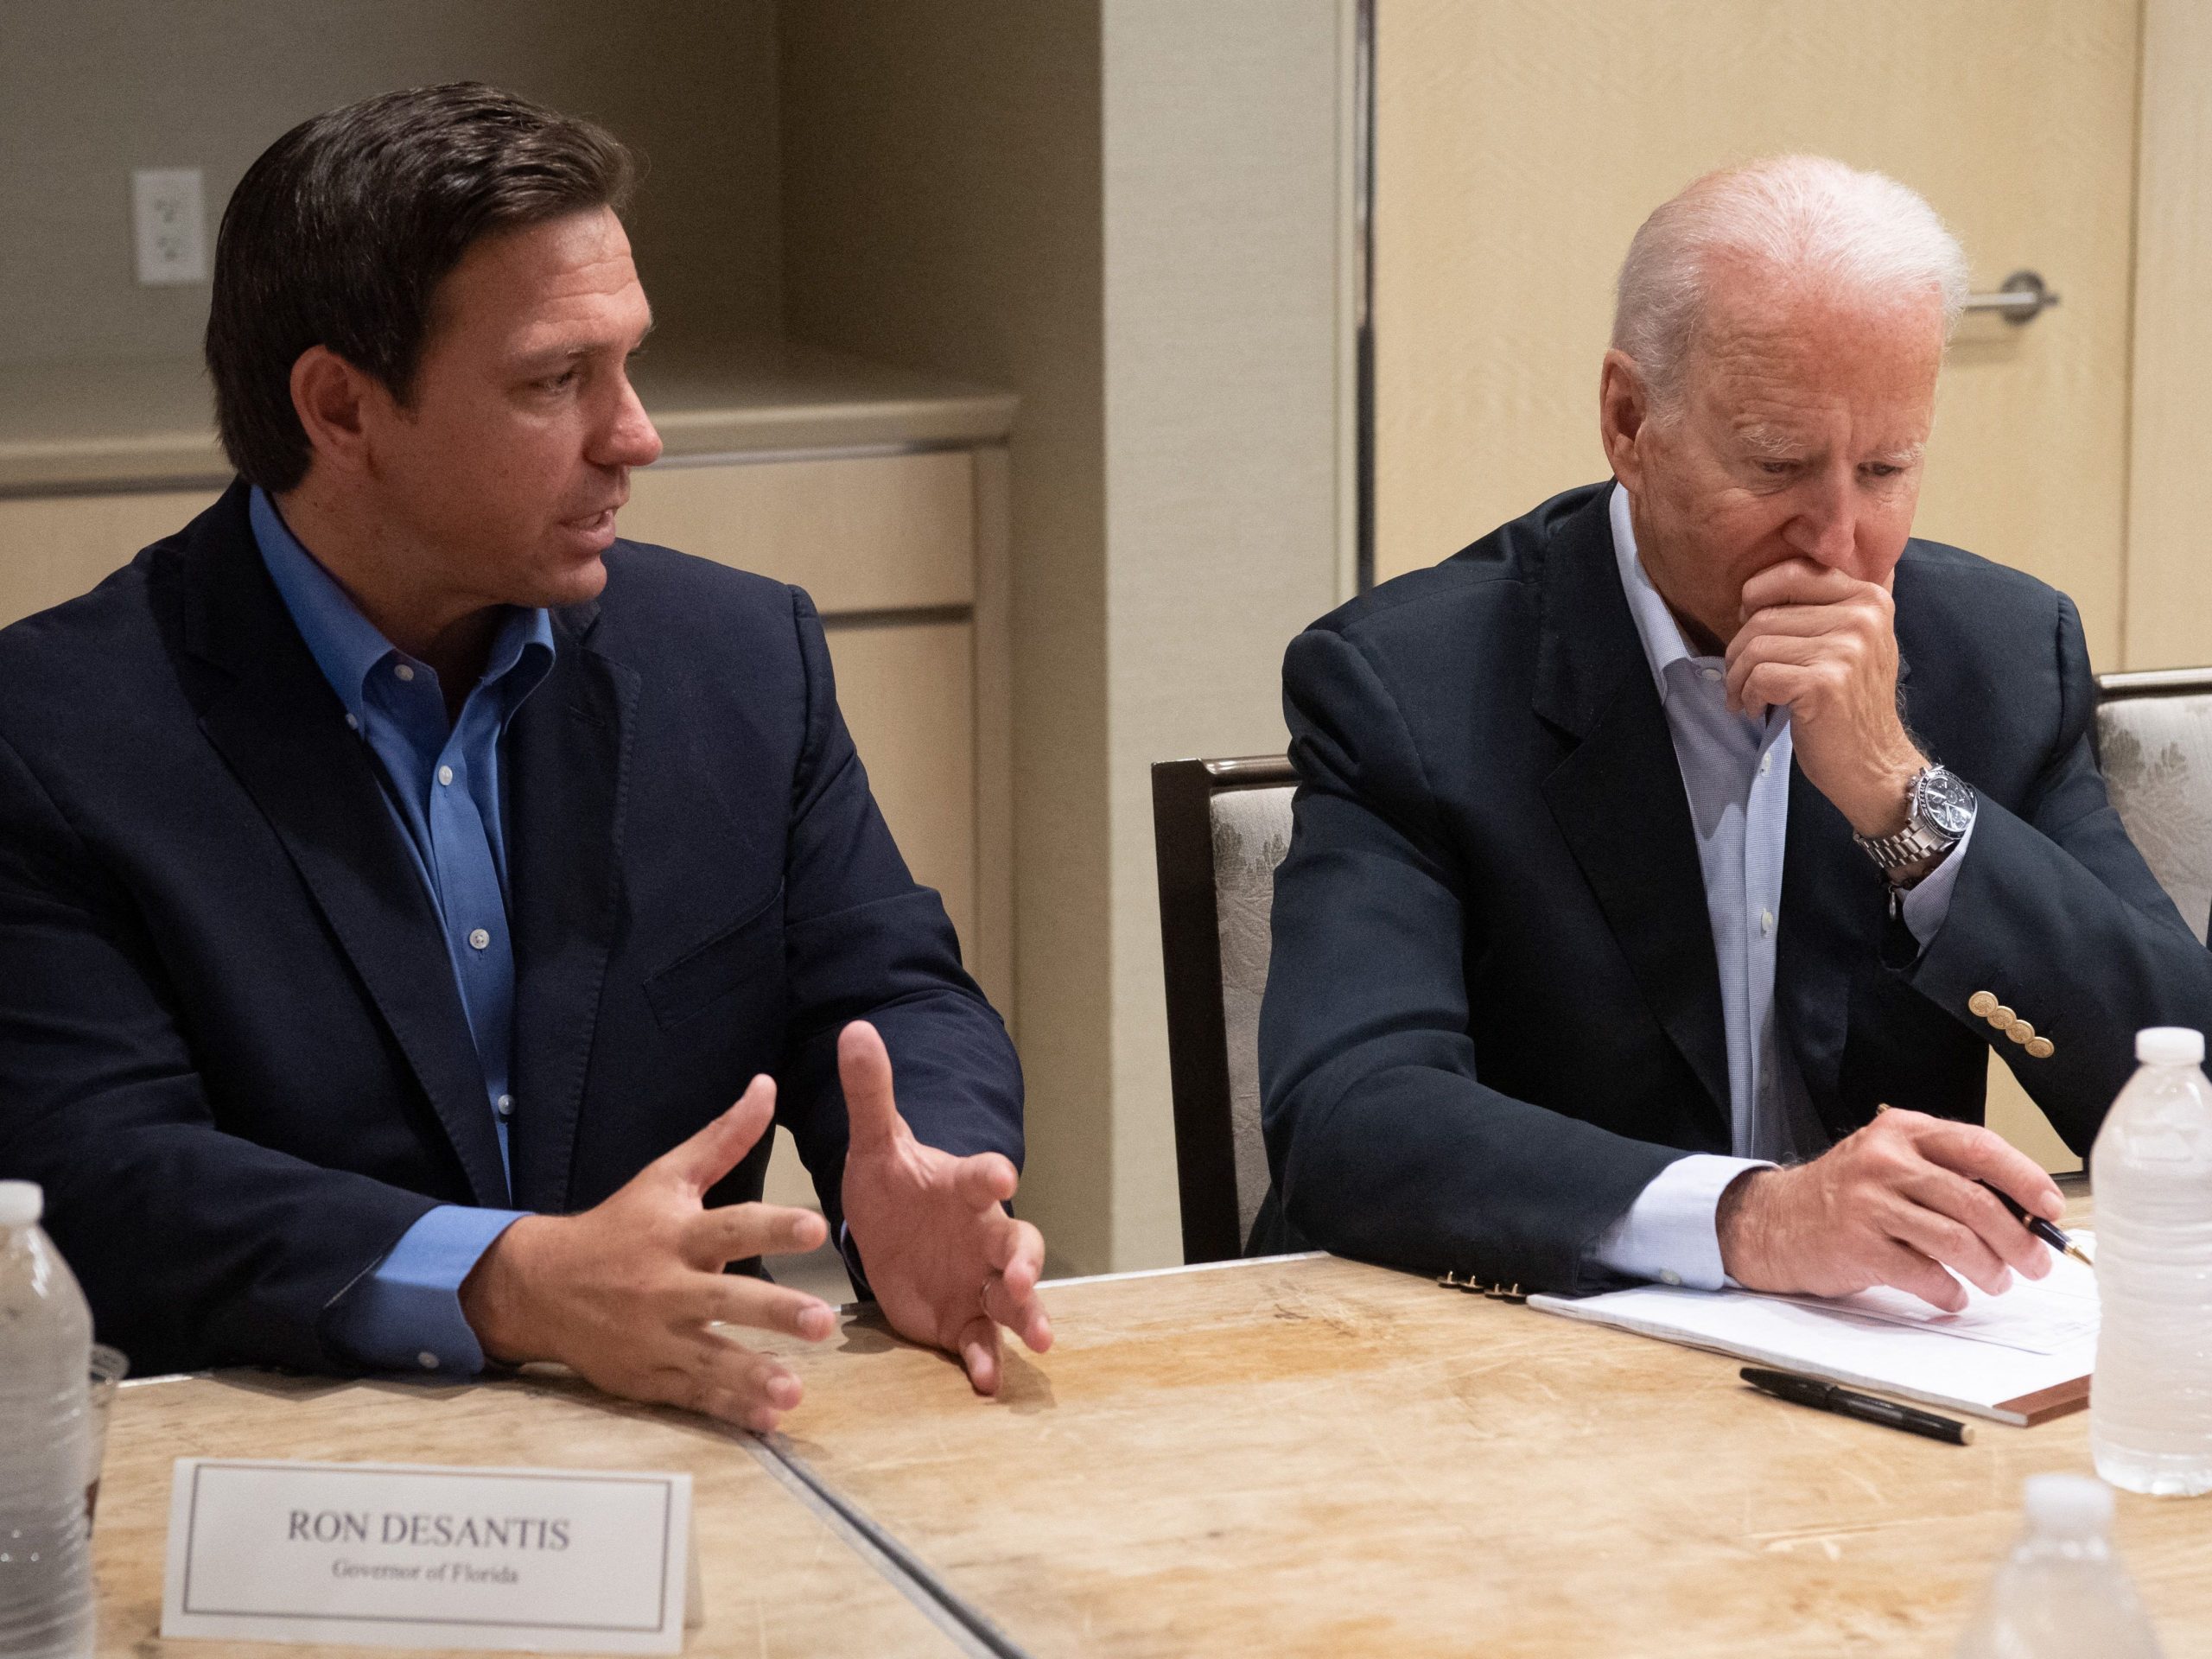 President Joe Biden and Florida Gov. Ron DeSantis at a meeting in Miami Beach Florida on July 1, 2021 following the collapse of the Champlain Towers South condo building in Surfside.